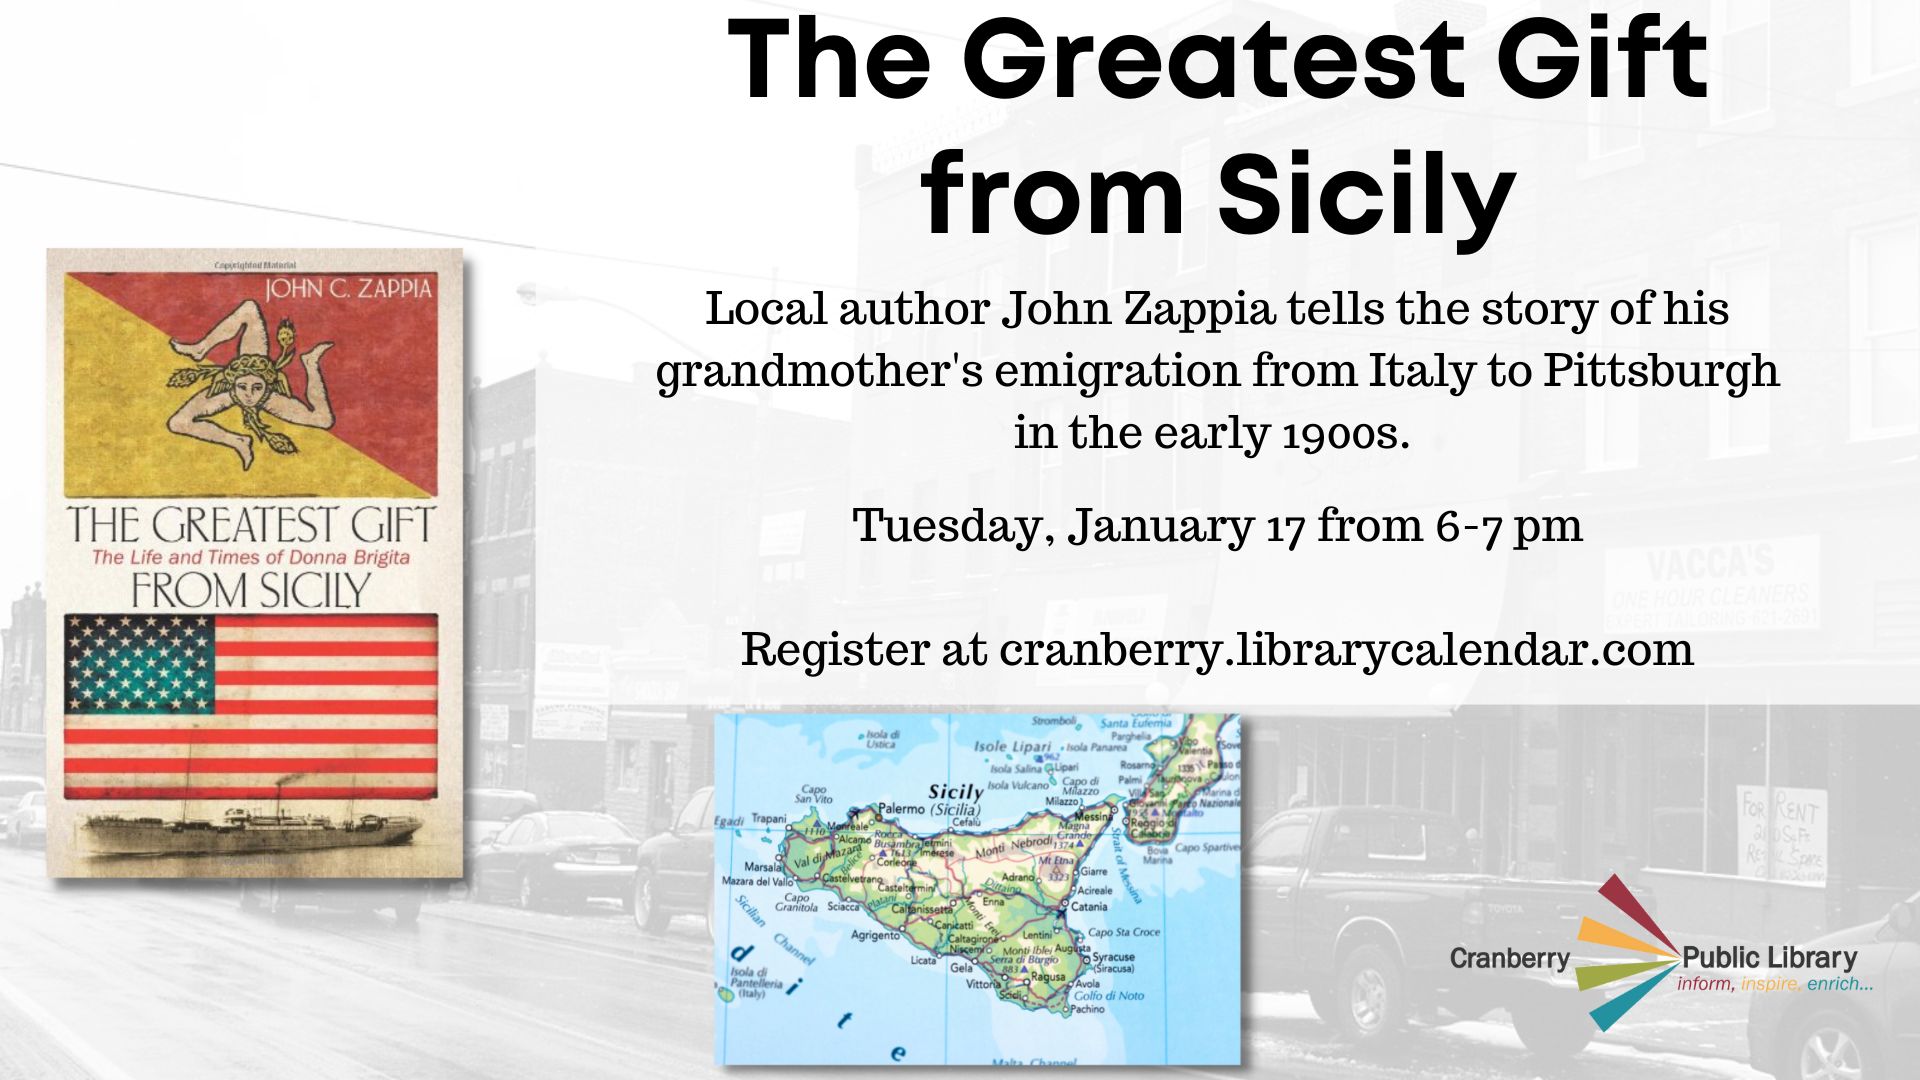 Flyer for The Greatest Gift from Sicily author talk